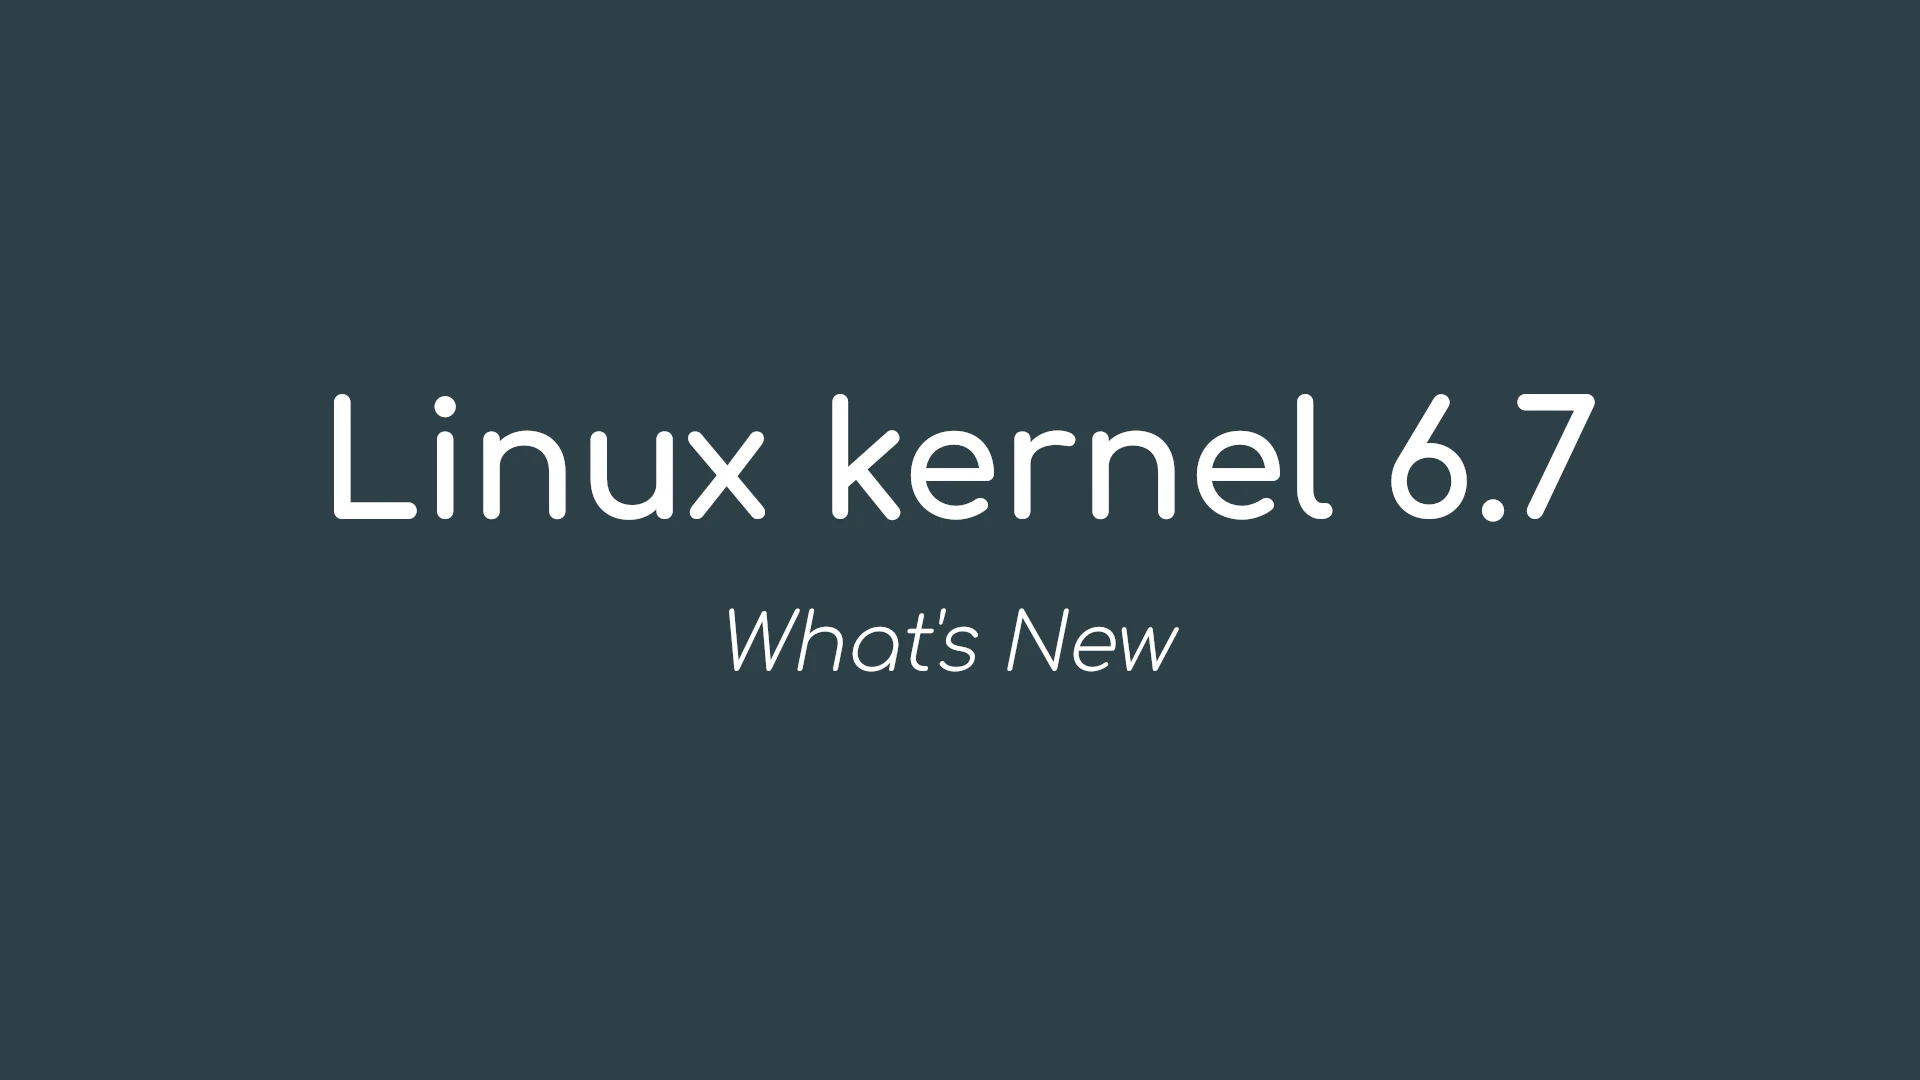 Linux Kernel 6.7 Officially Released, This Is What’s New